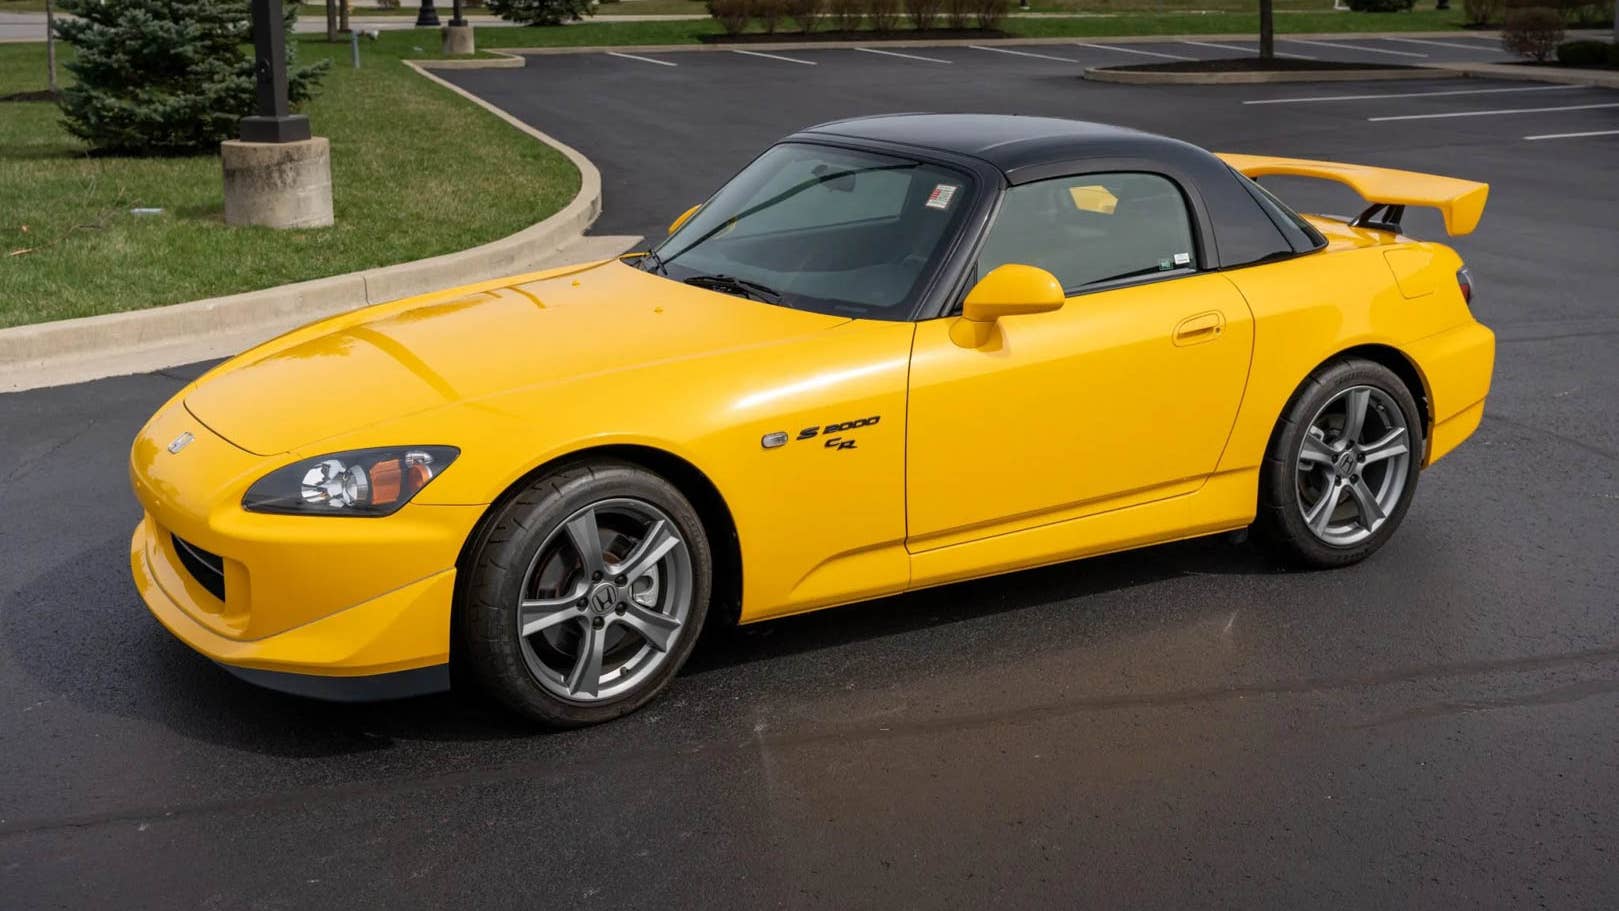 Ultra-Rare 123-Mile Honda S2000 CR Sells for an Eye-Watering $200,000